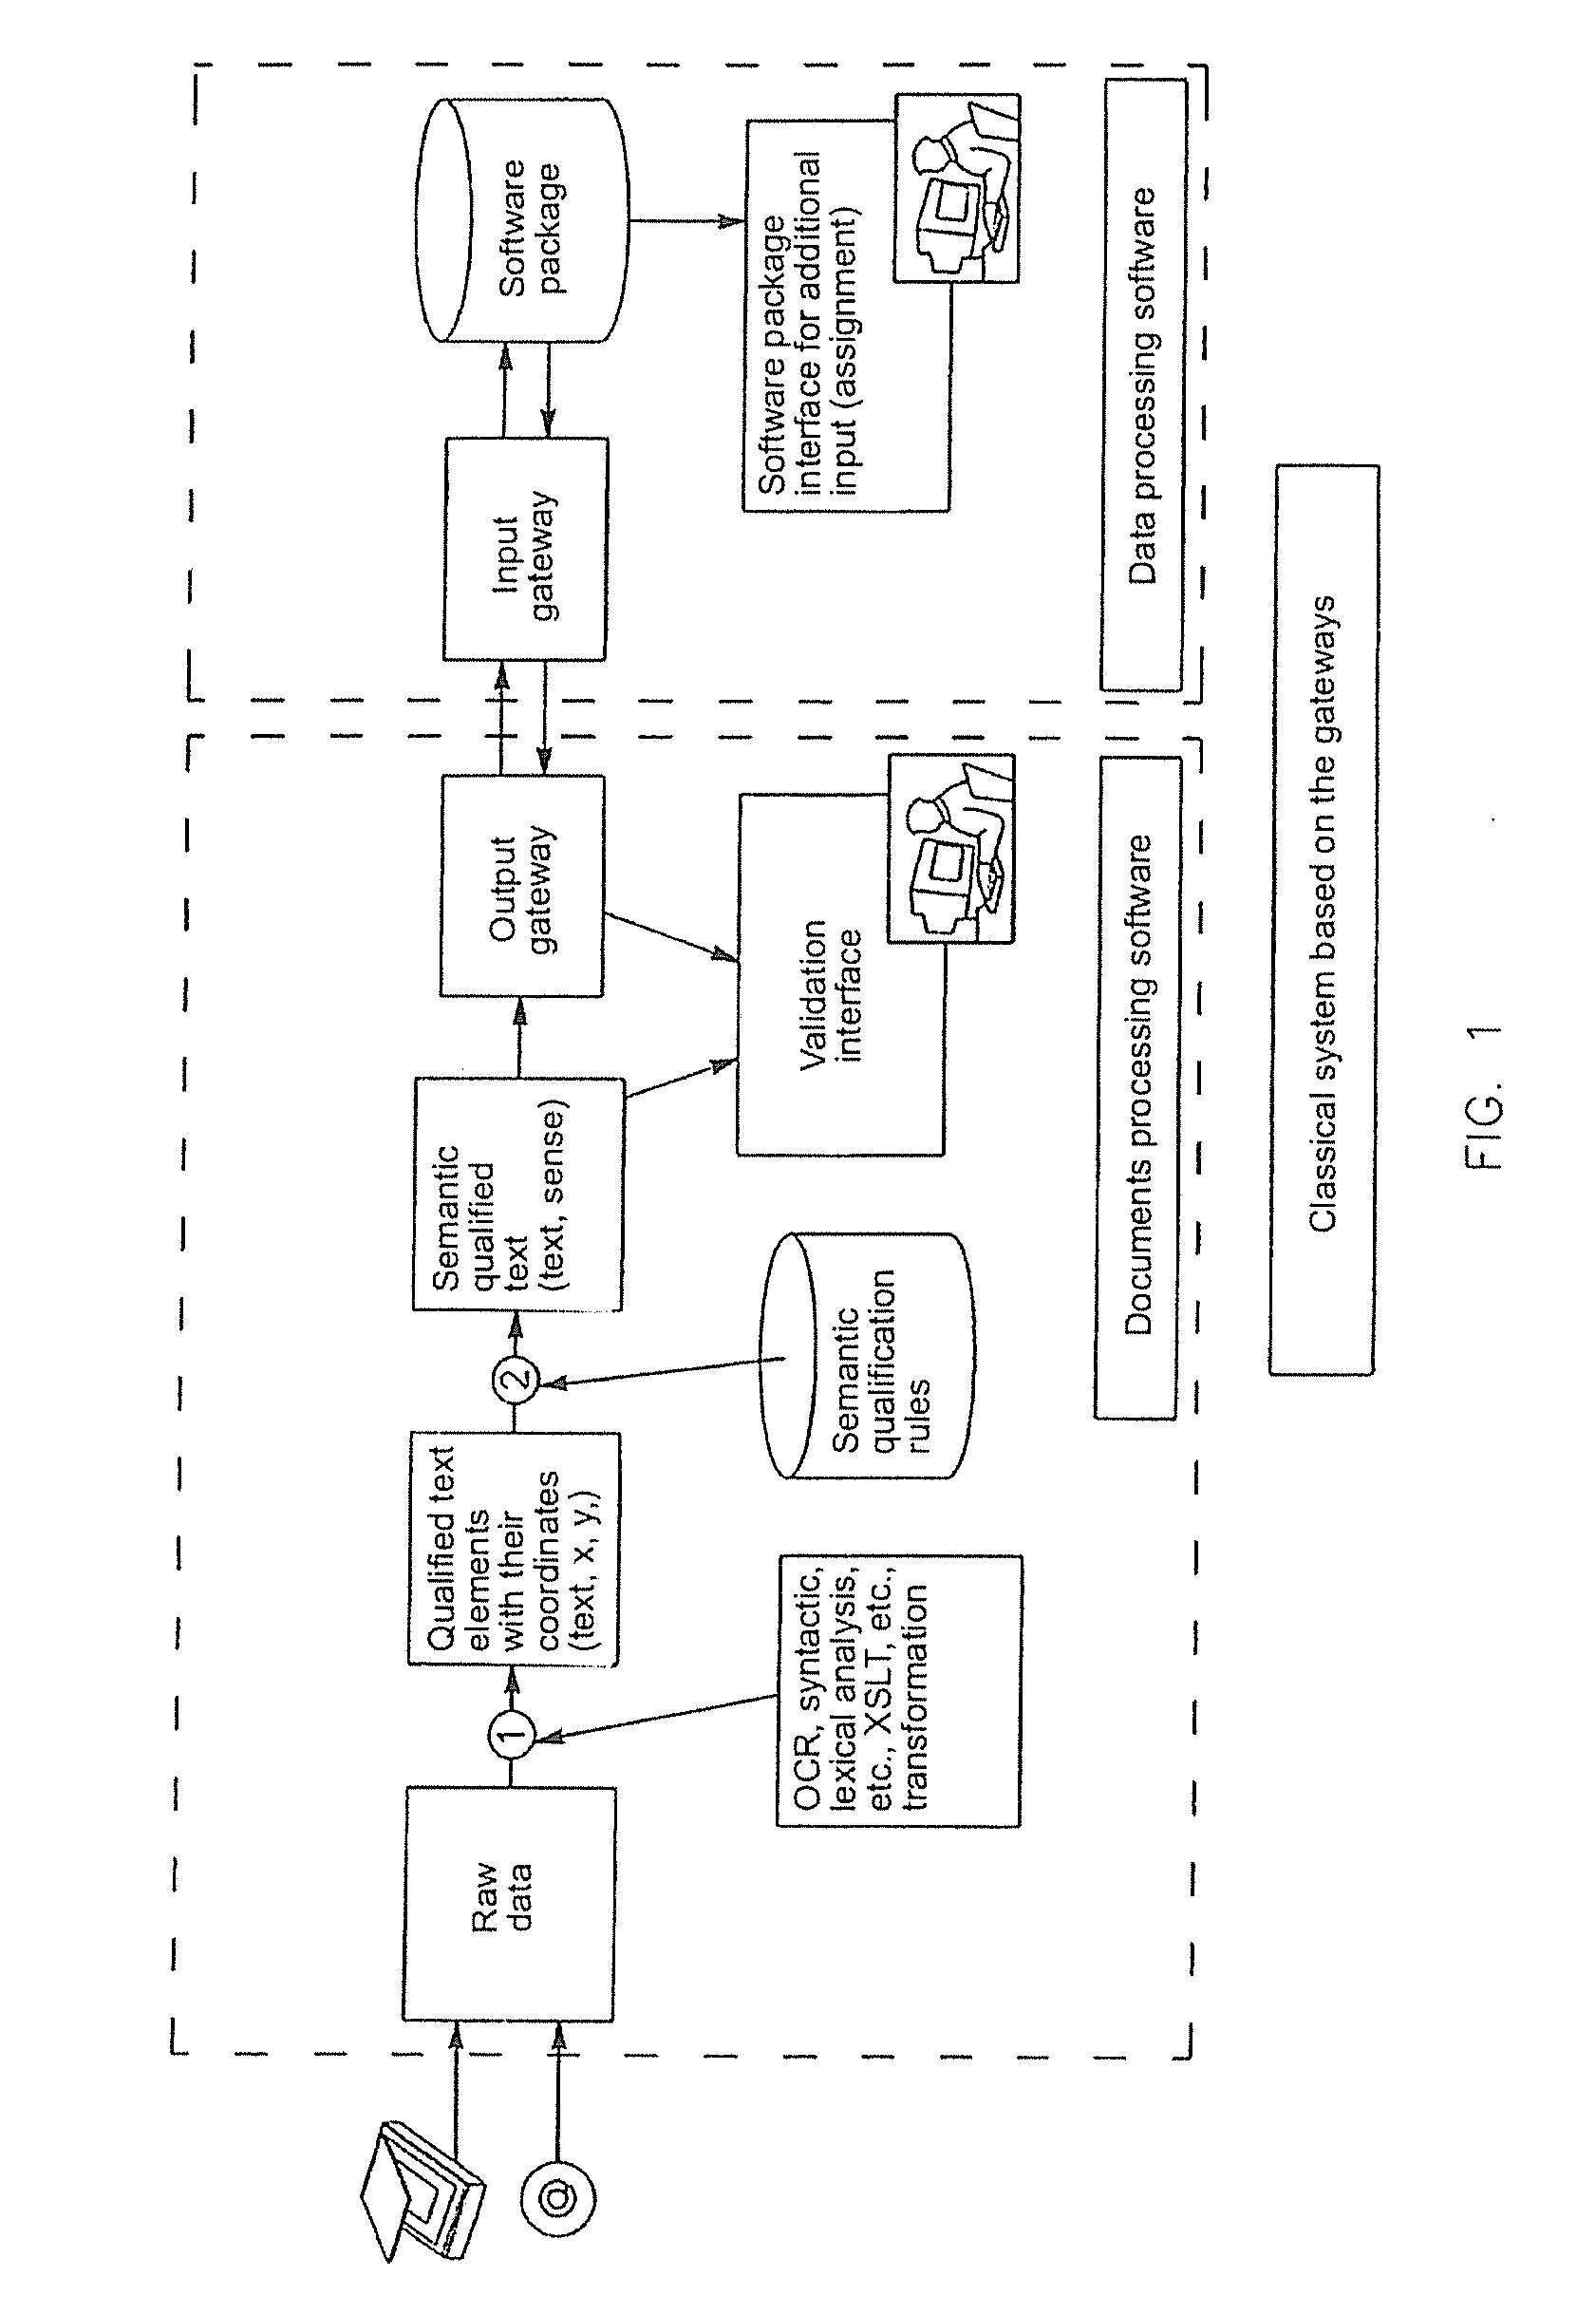 Method and system for aided input especially for computer management tools